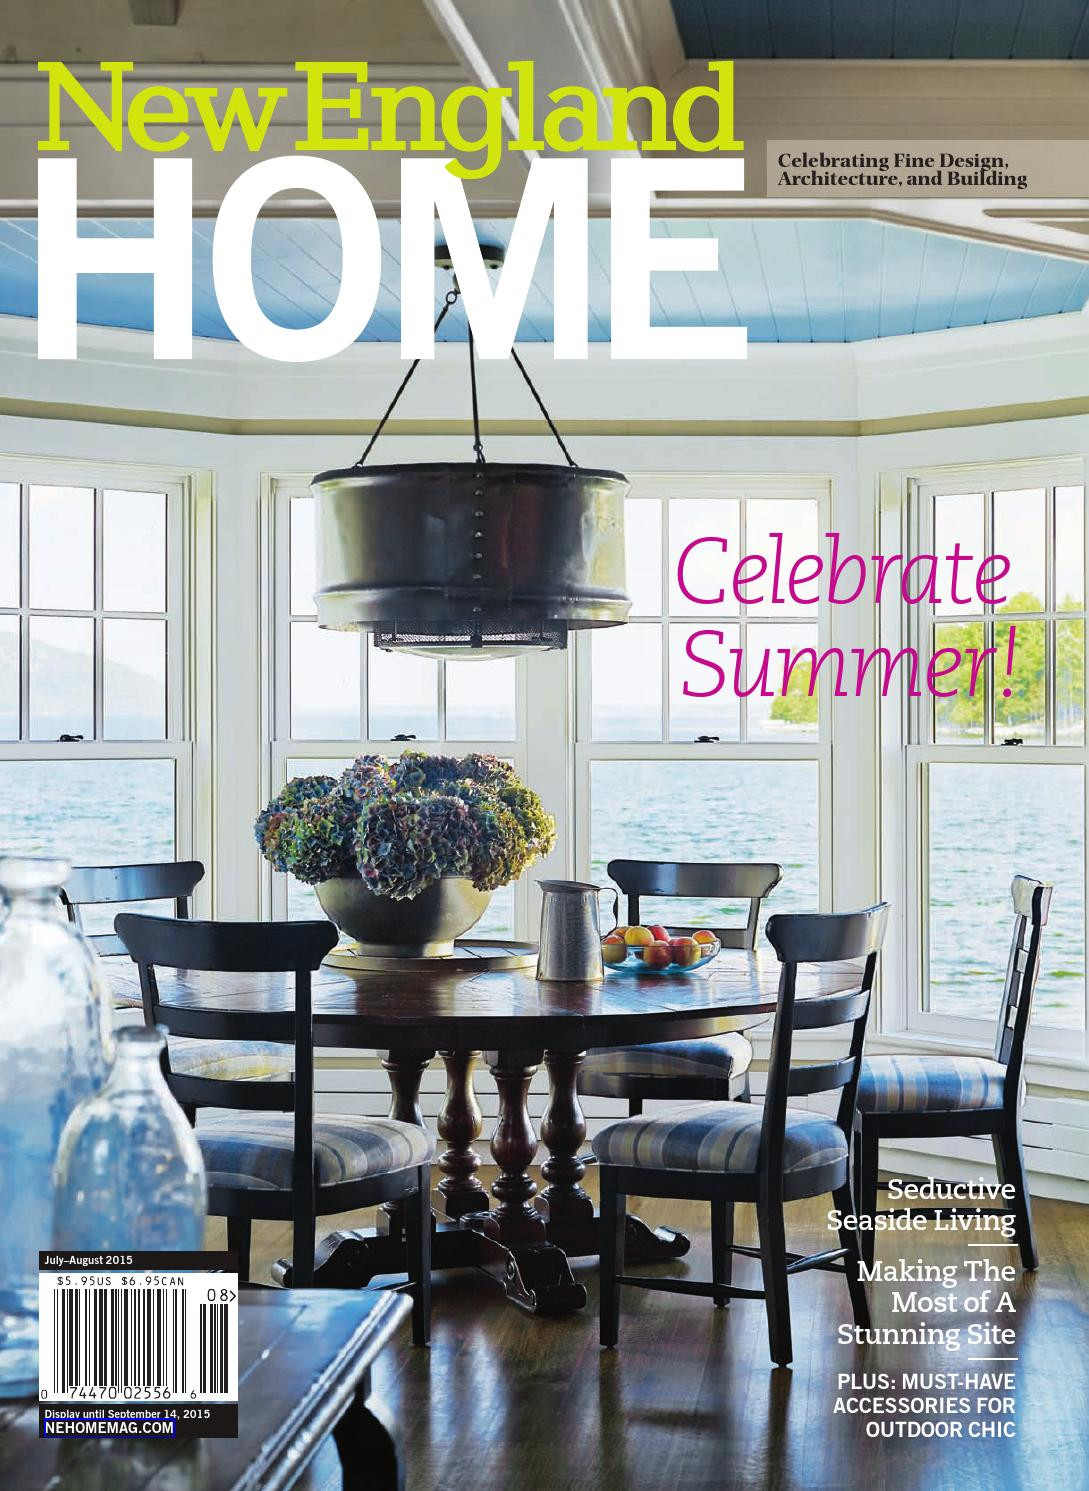 hardwood floor refinishing concord nh of new england home july august 2015 by new england home magazine llc regarding new england home july august 2015 by new england home magazine llc issuu